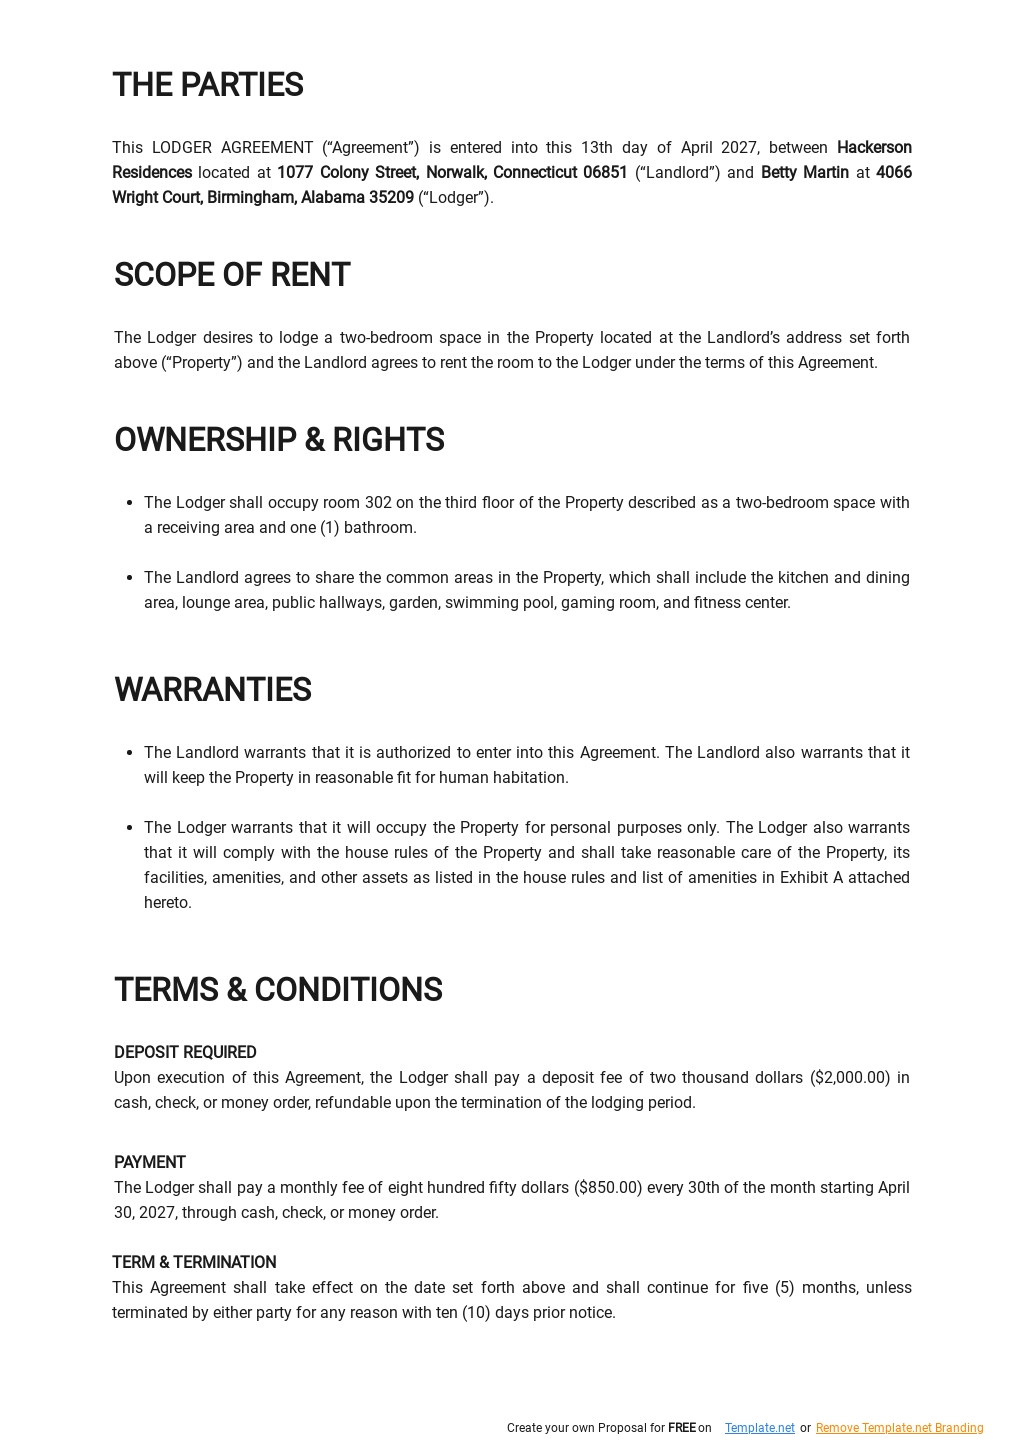 Free Basic Lodger Agreement Template - Google Docs, Word In notice to terminate a lodger agreement template